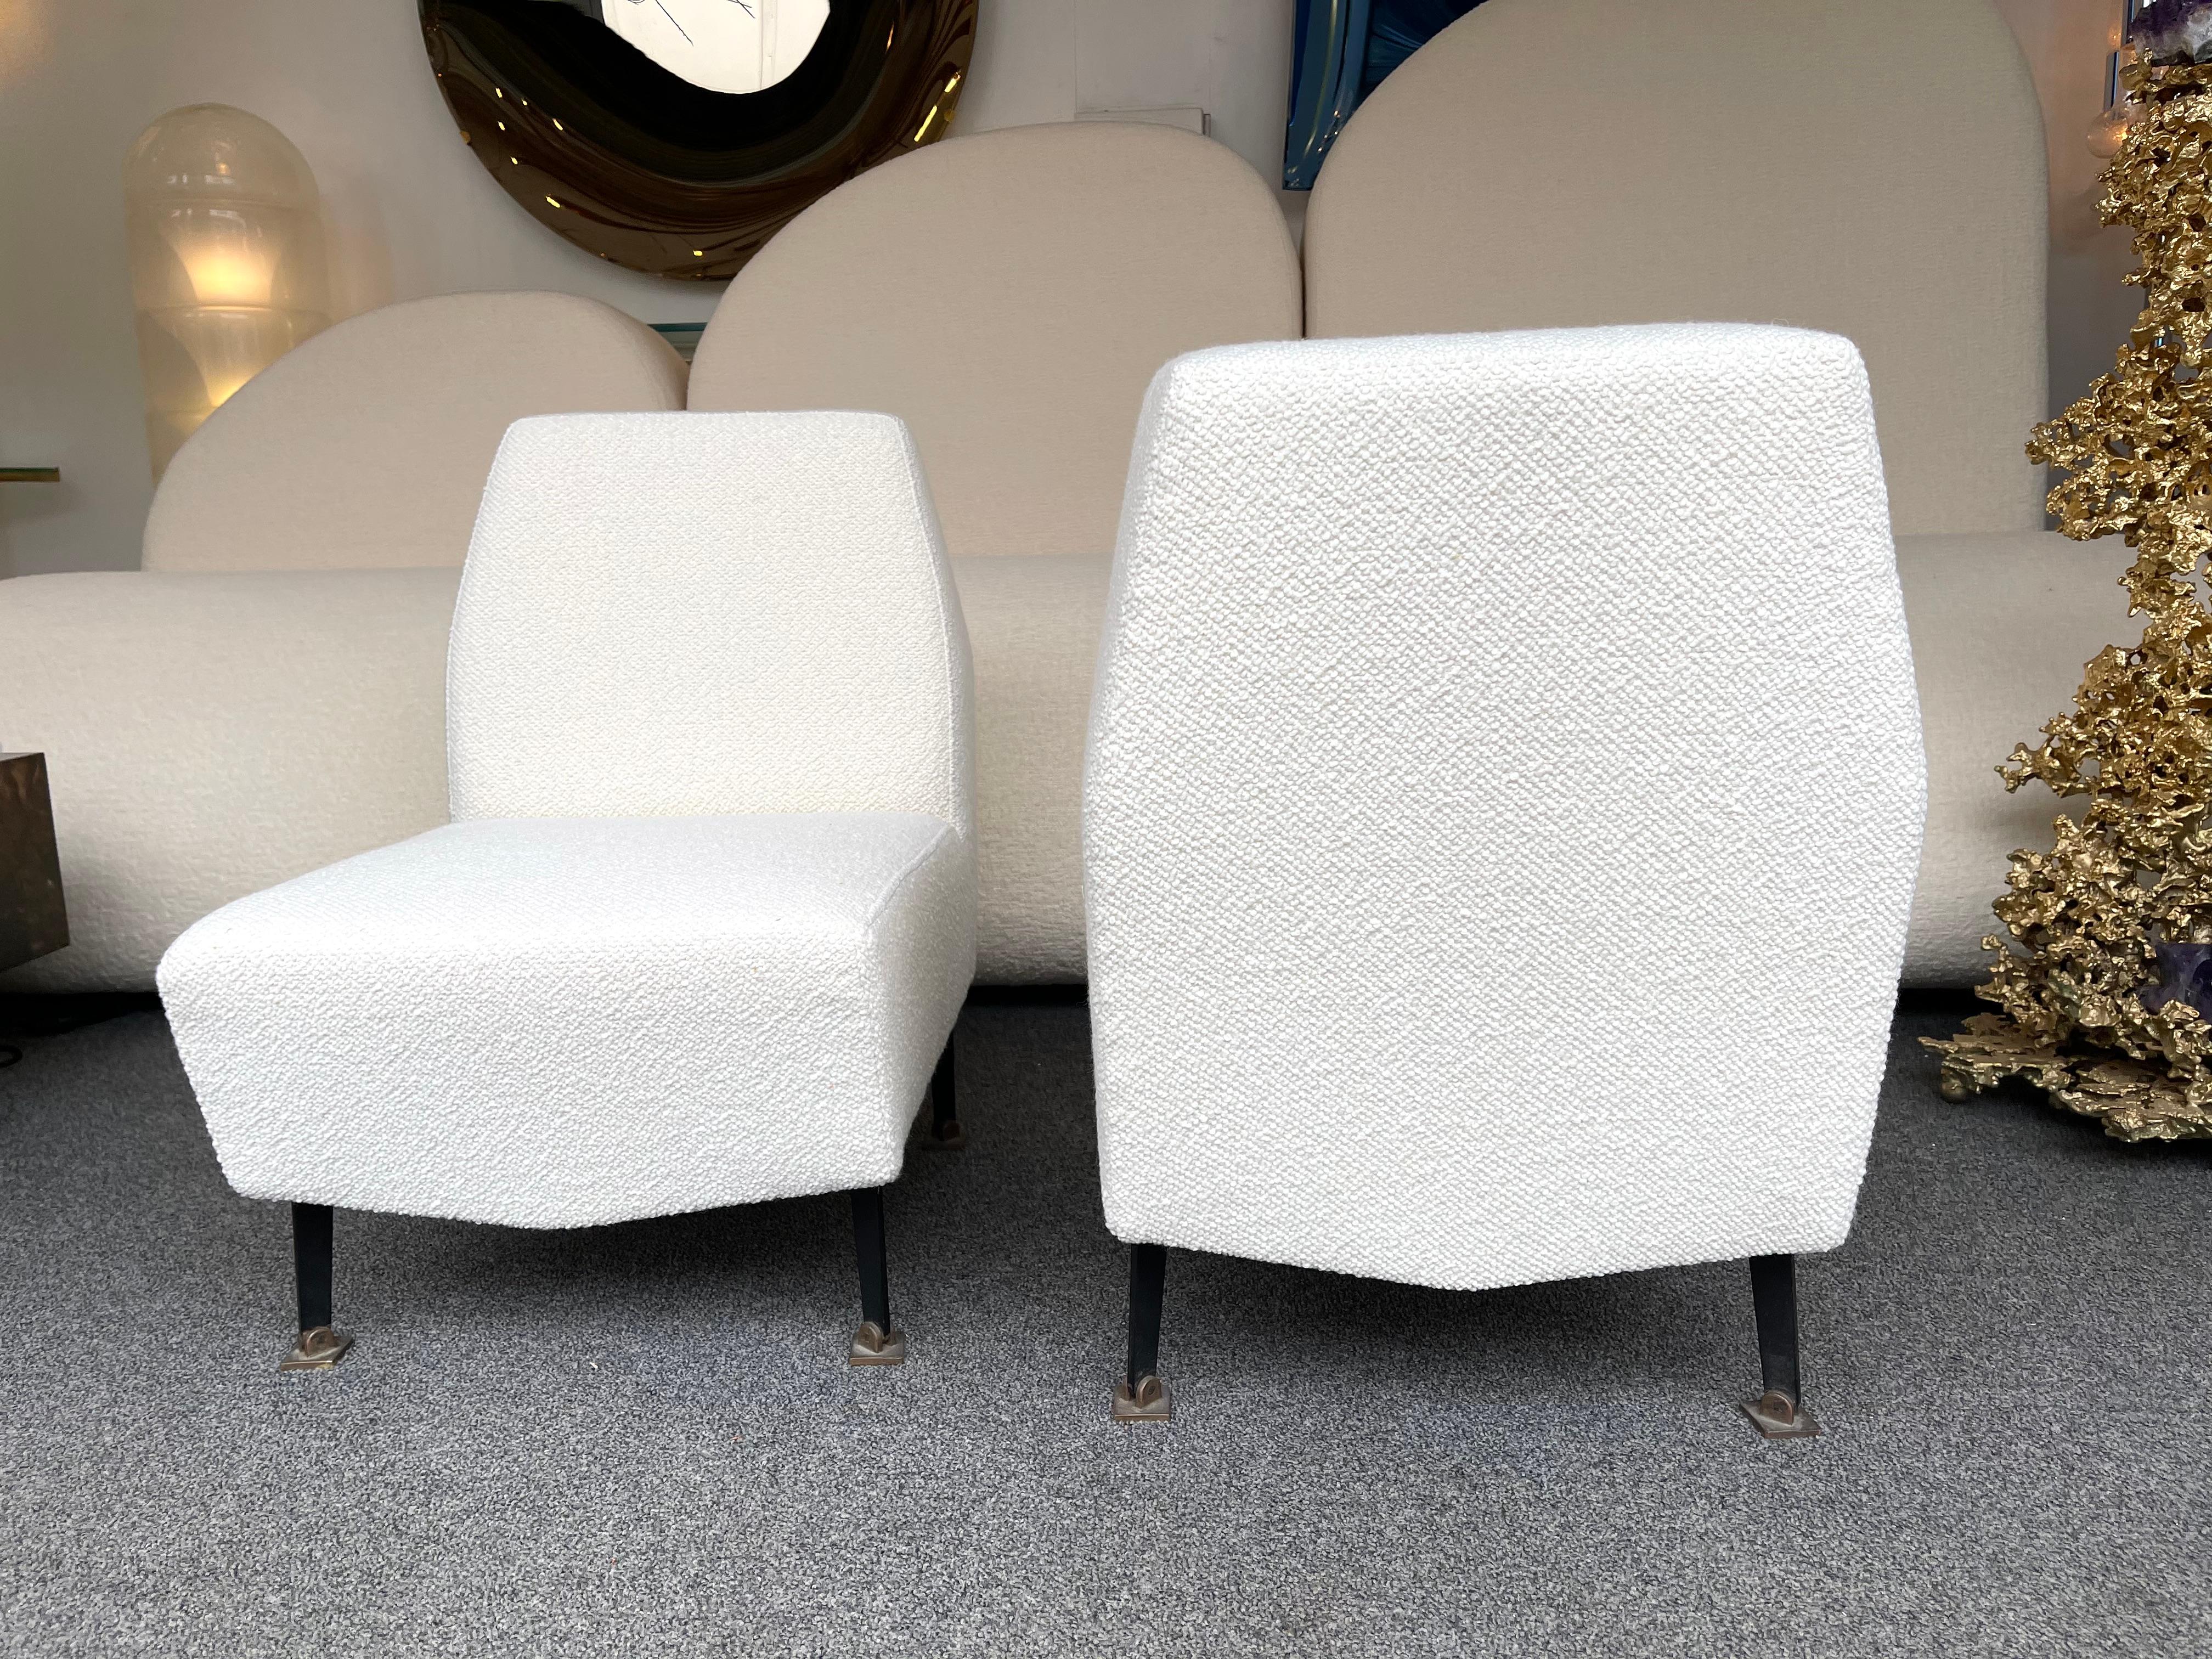 Mid-Century Modern Pair of Slipper Chairs Bouclé Fabric by Studio APA for Lenzi, Italy, 1960s For Sale